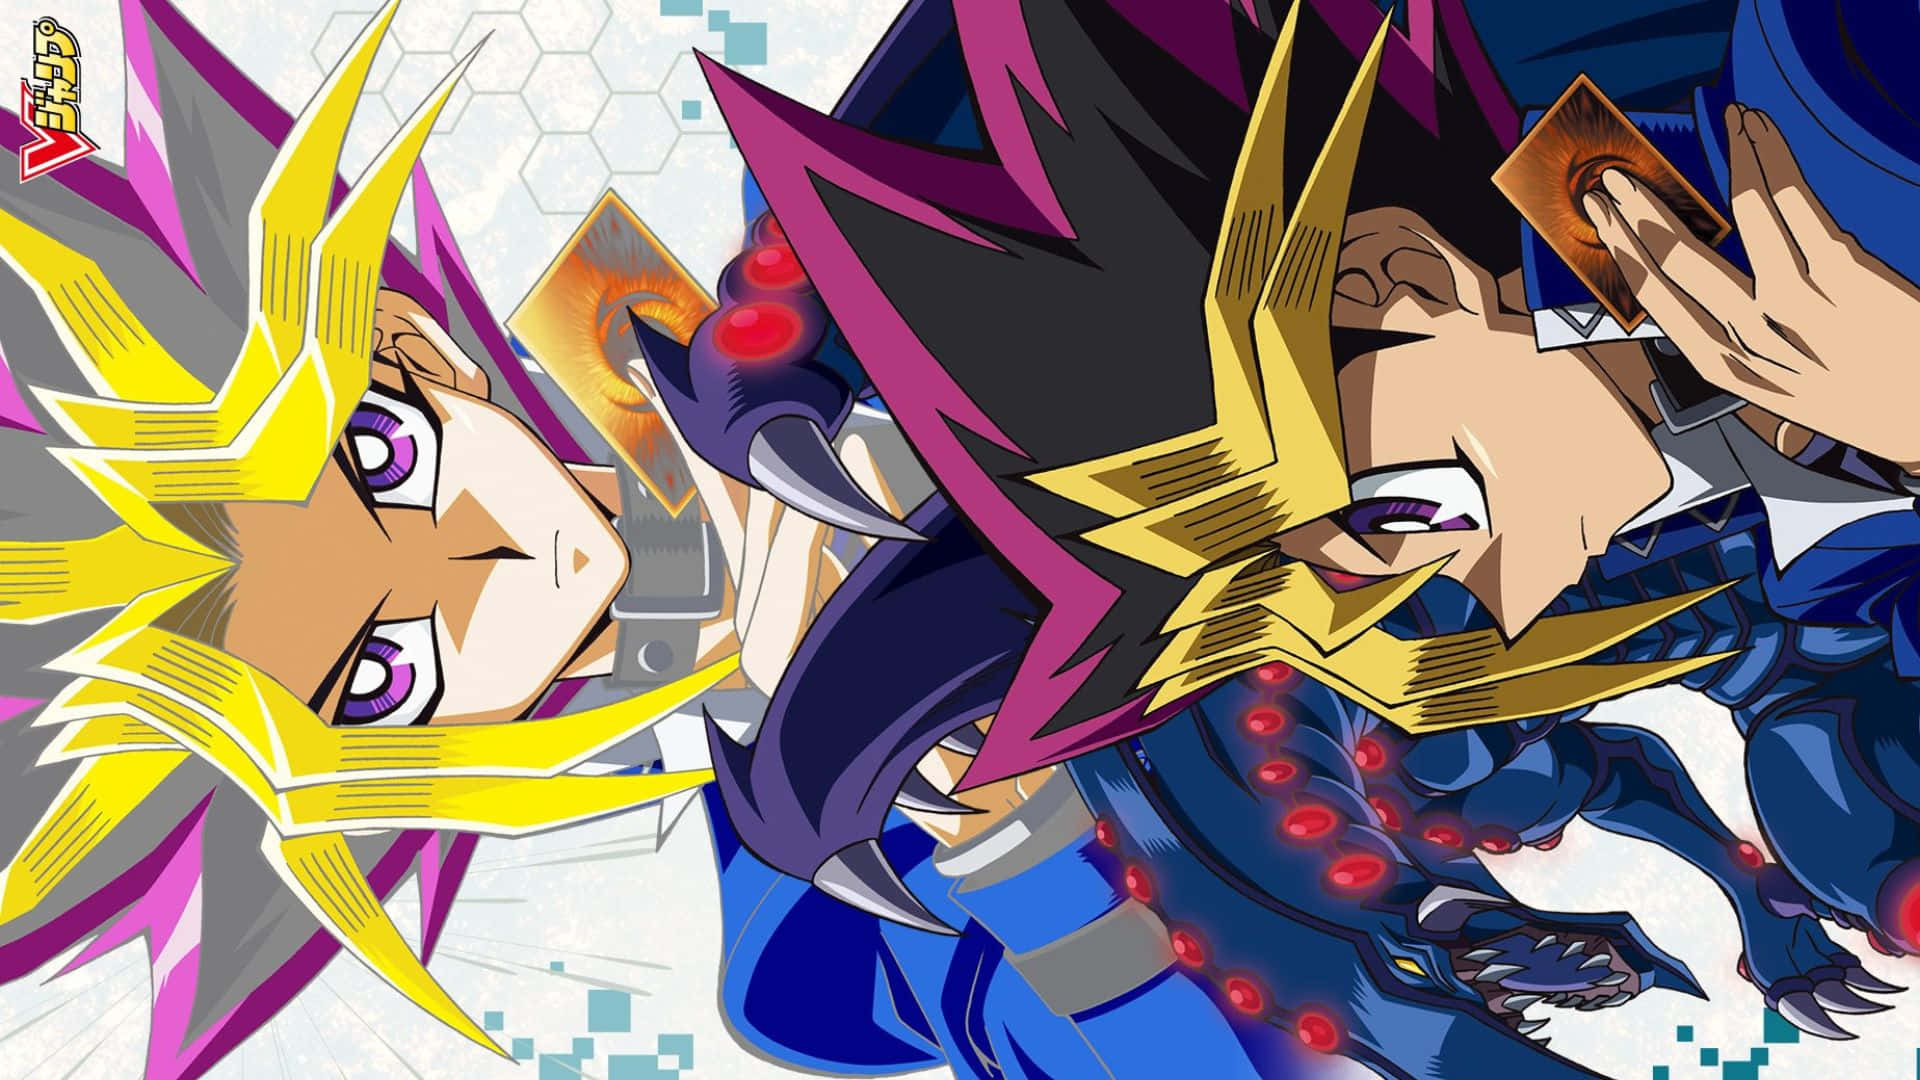 Duelists Unite in the World of Yugioh